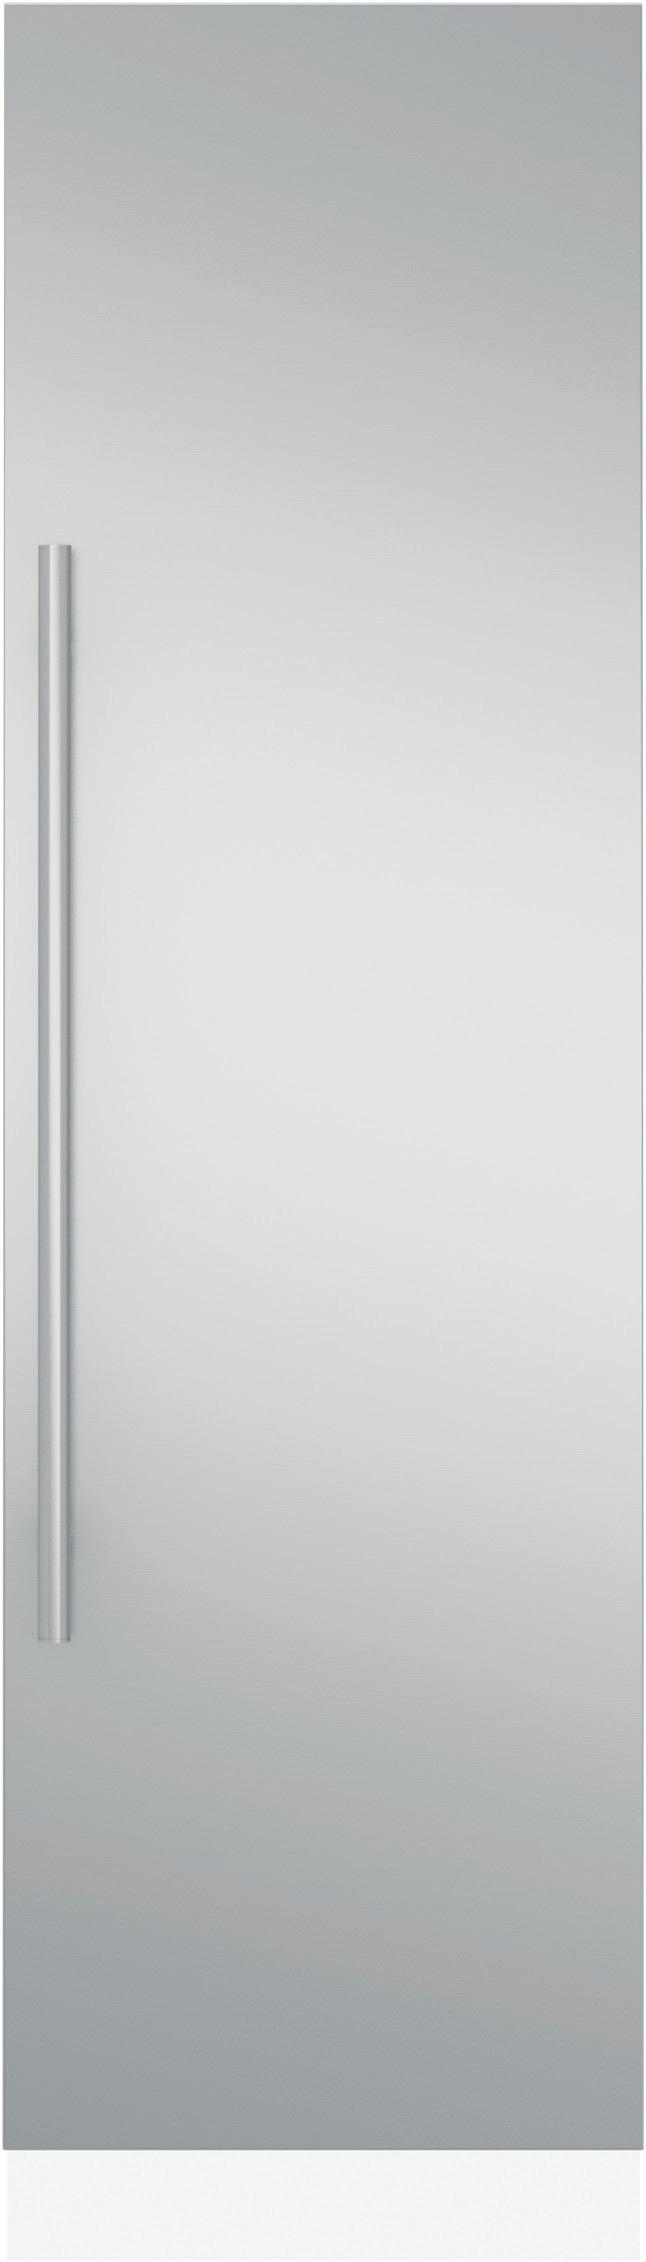 MONOGRAM 24" INTEGRATED REFRIGERATOR ZIR240NPKII FEATURES AND ENEFITS FULLY INTEGRATED COLUMN DESIGN With concealed hinge offers a look of seamless perfection that installs flush with surrounding